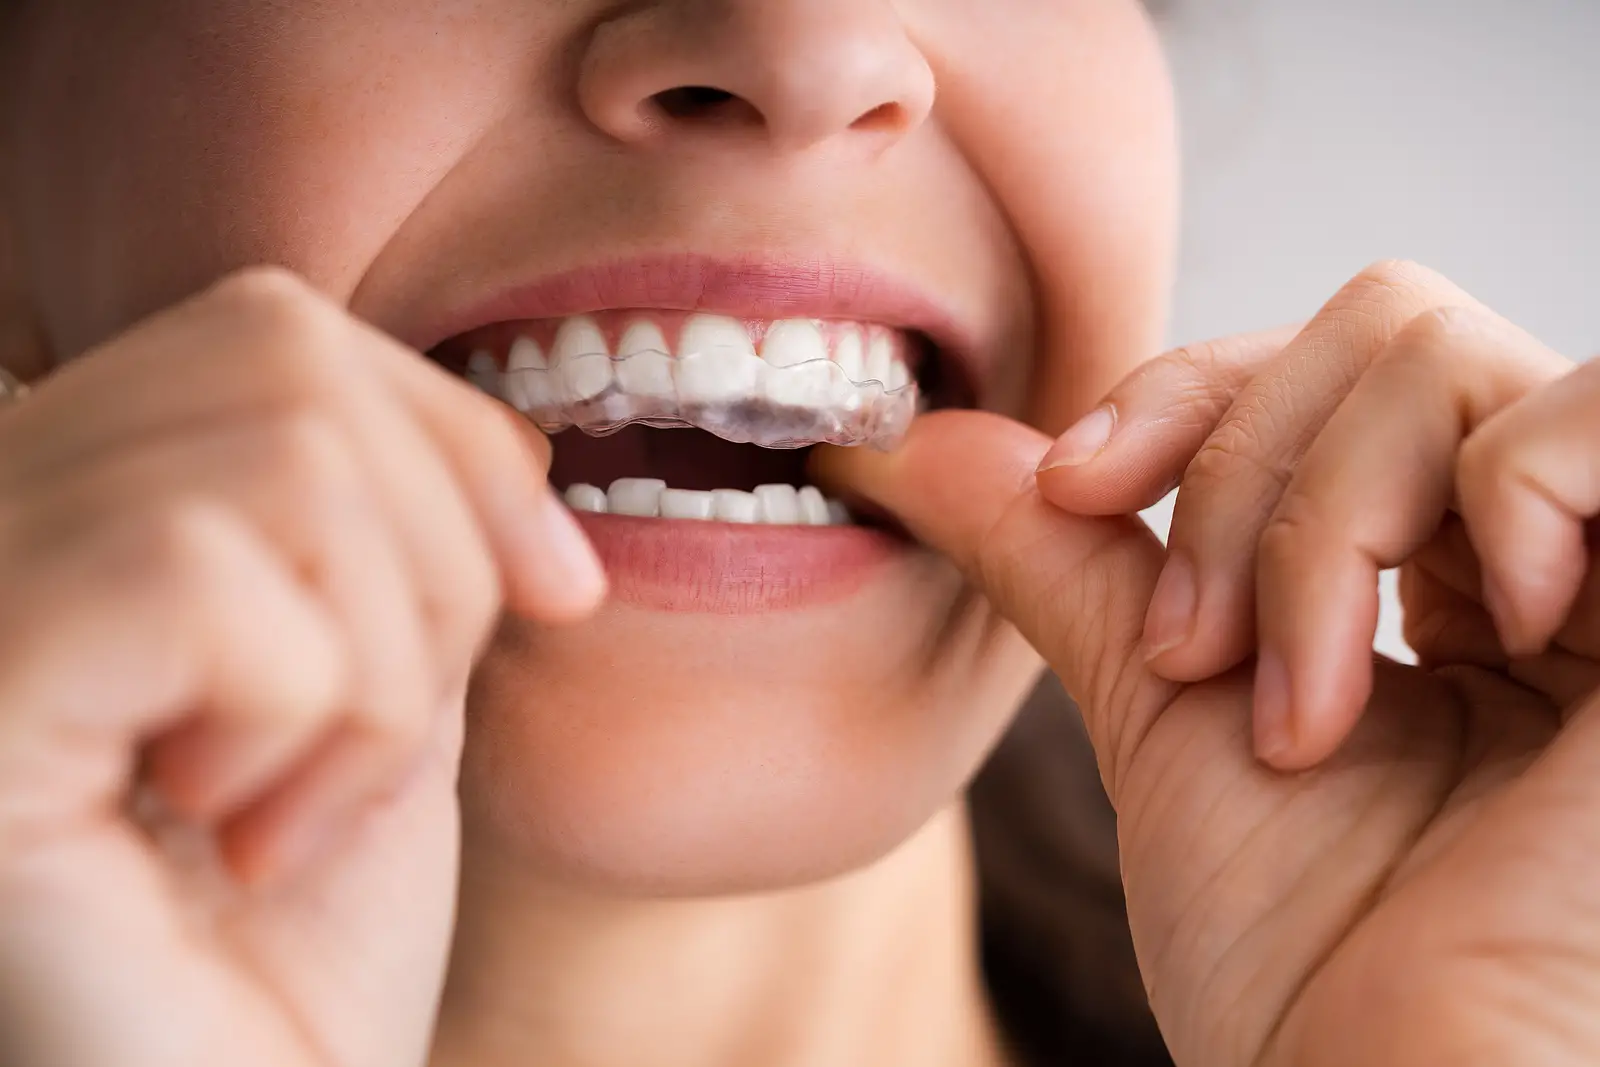 Common Pediatric Dental Issues and How Invisalign Can Help